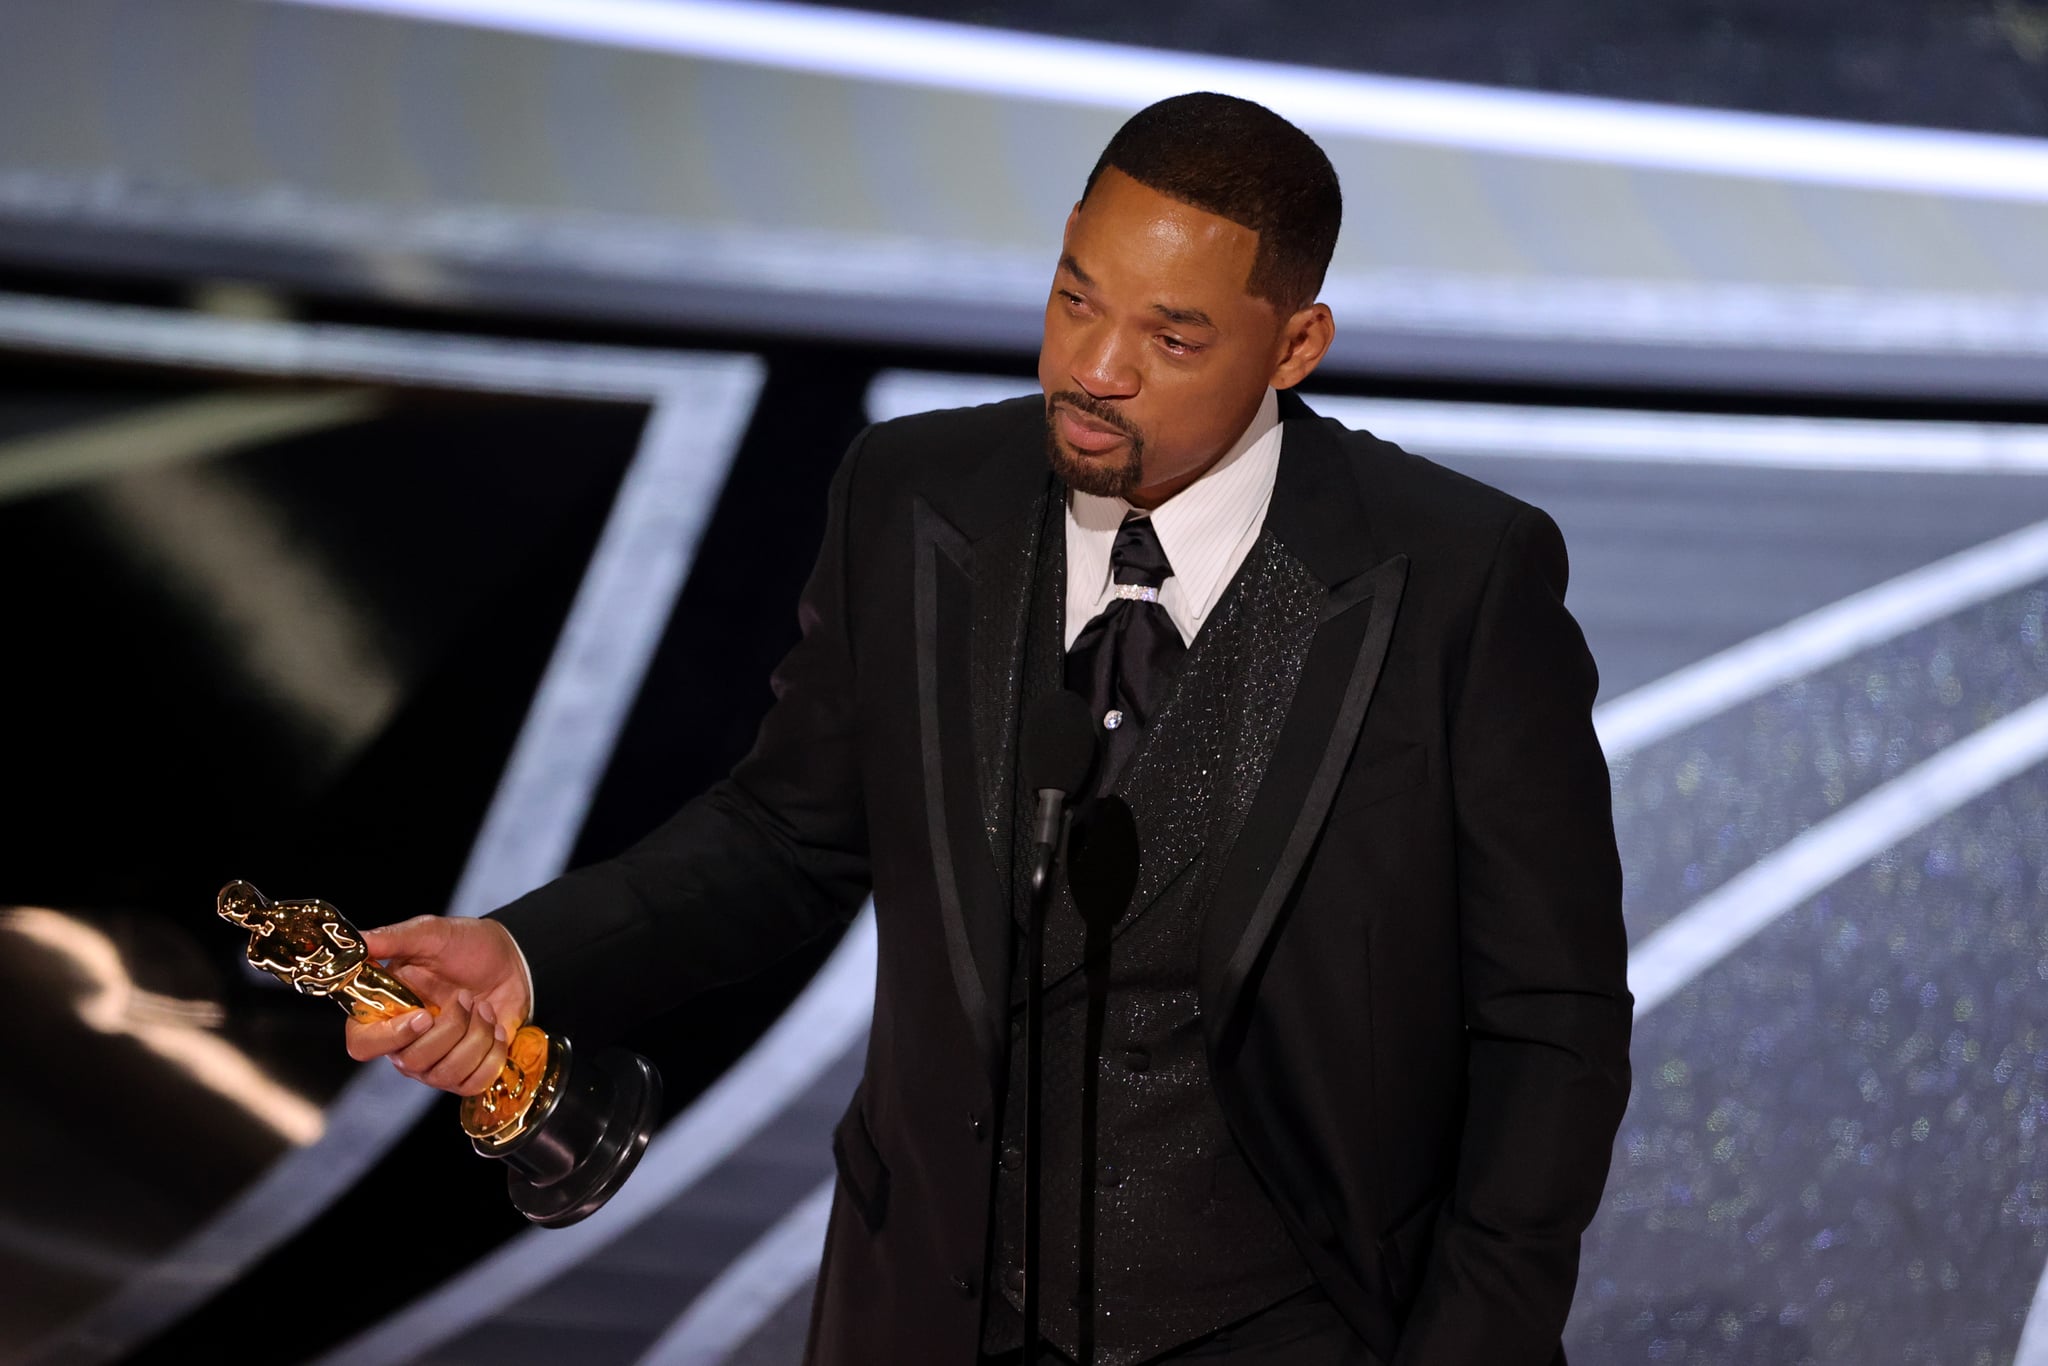 HOLLYWOOD, CALIFORNIA - MARCH 27: Will Smith accepts the Actor in a Leading Role award for 'King Richard' onstage during the 94th Annual Academy Awards at Dolby Theatre on March 27, 2022 in Hollywood, California. (Photo by Neilson Barnard/Getty Images)